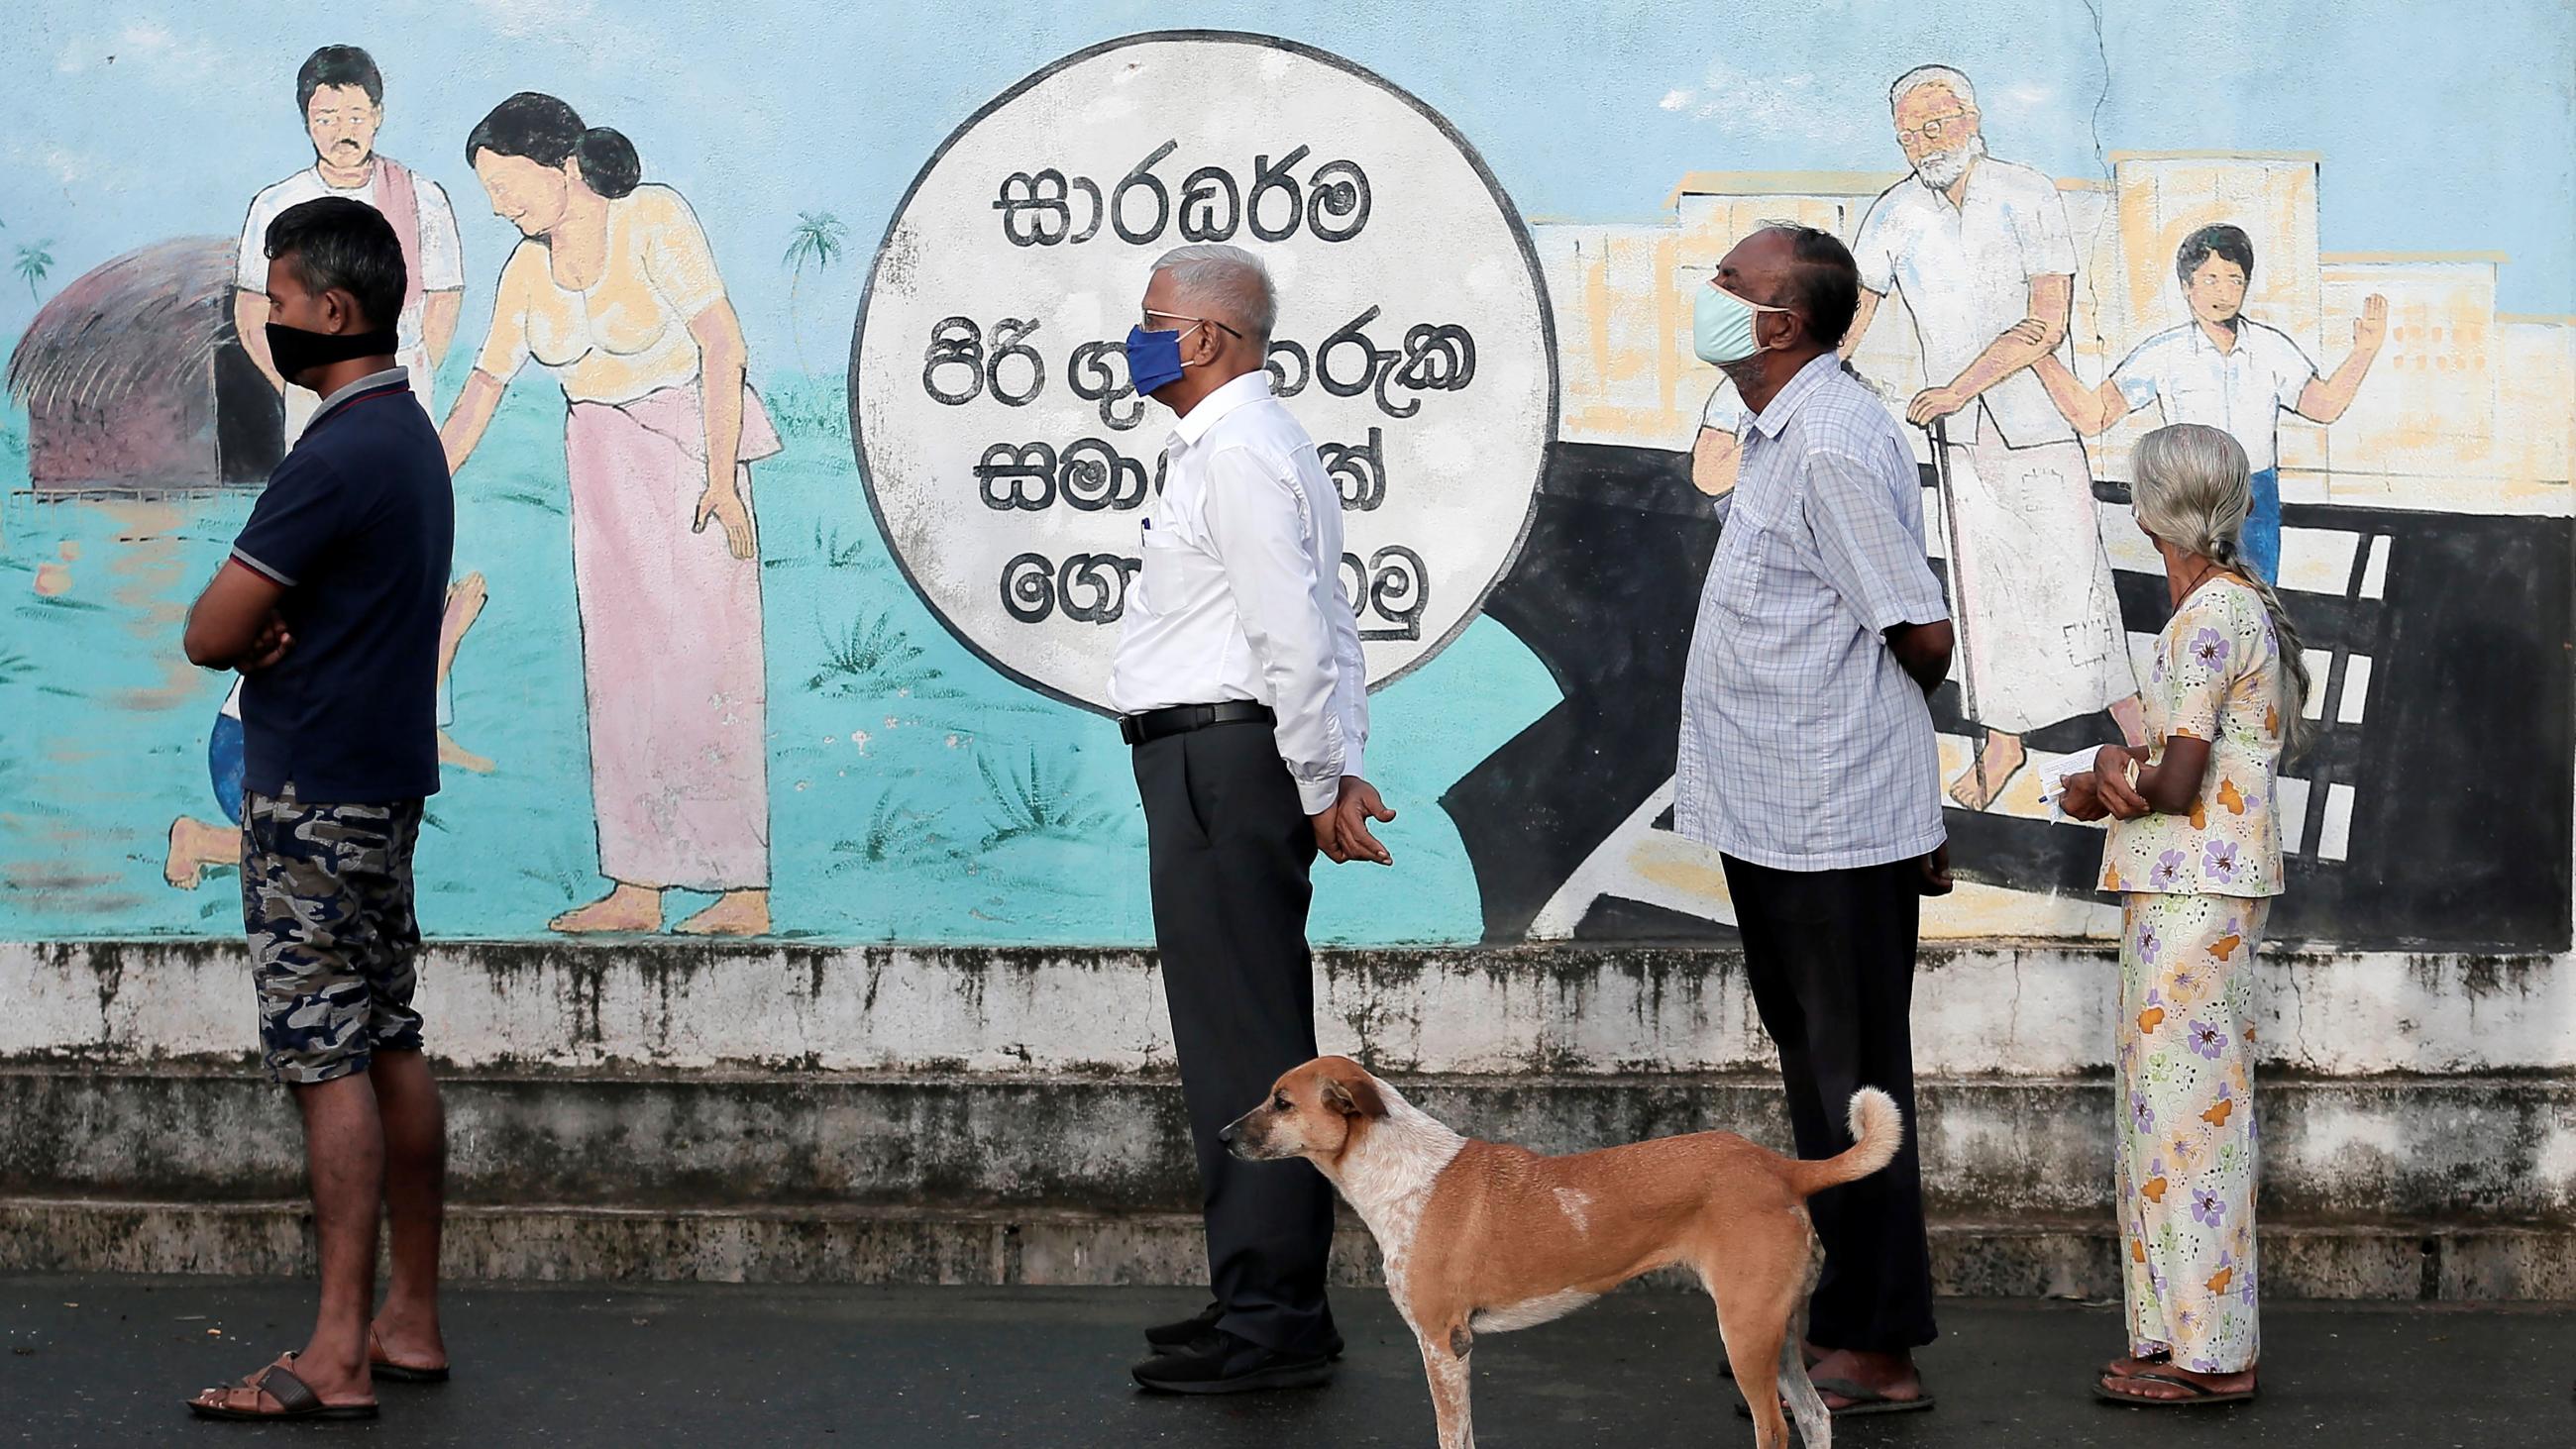 People wearing protective masks wait in a line outside a polling station as they prepare to cast their vote, while a dog stands next to them, during the country's parliamentary election in Sri Lanka.